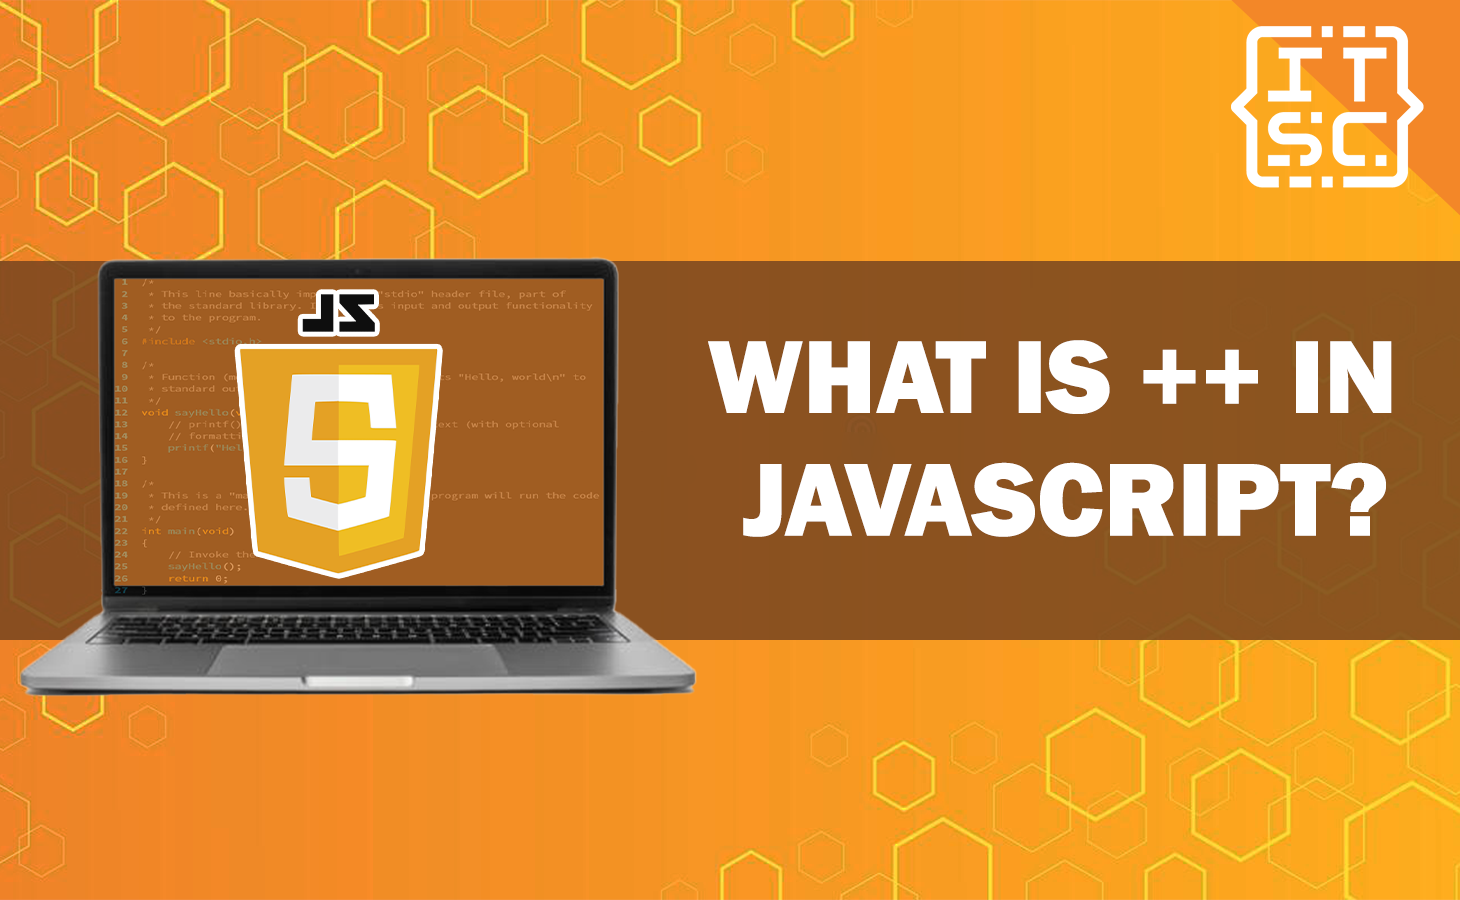 What is ++ in javascript